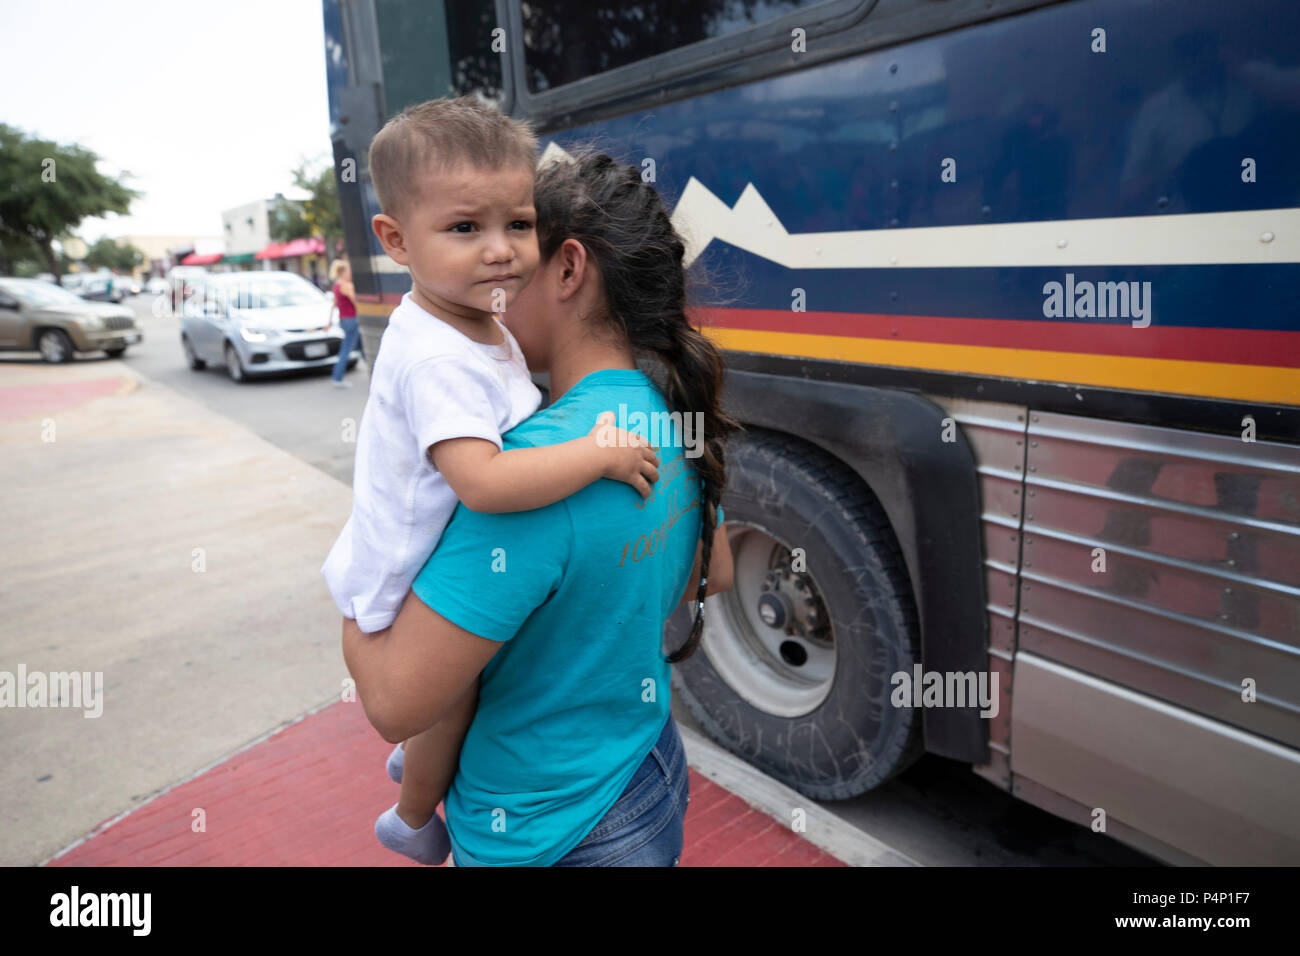 An immigrant mother, wearing an electronic monitoring device, and her young child captured coming across the United States-Mexico border in Texas are released at a bus station in McAllen. The family will travel to stay with family members in the U.S. while awaiting a  deportation or asylum hearing. Stock Photo